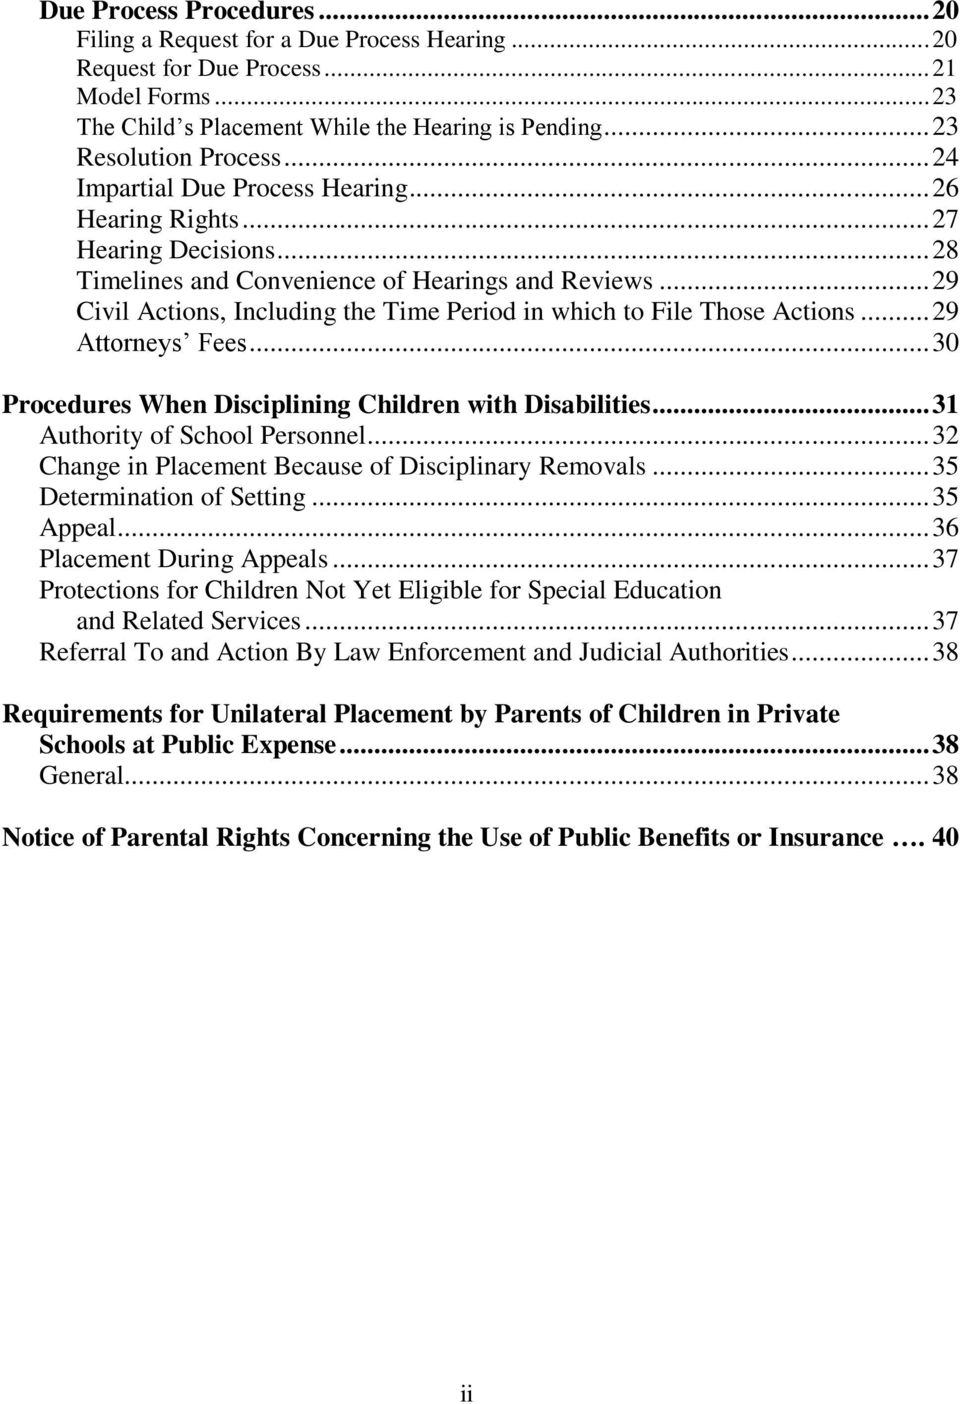 .. 29 Civil Actions, Including the Time Period in which to File Those Actions... 29 Attorneys Fees... 30 Procedures When Disciplining Children with Disabilities... 31 Authority of School Personnel.